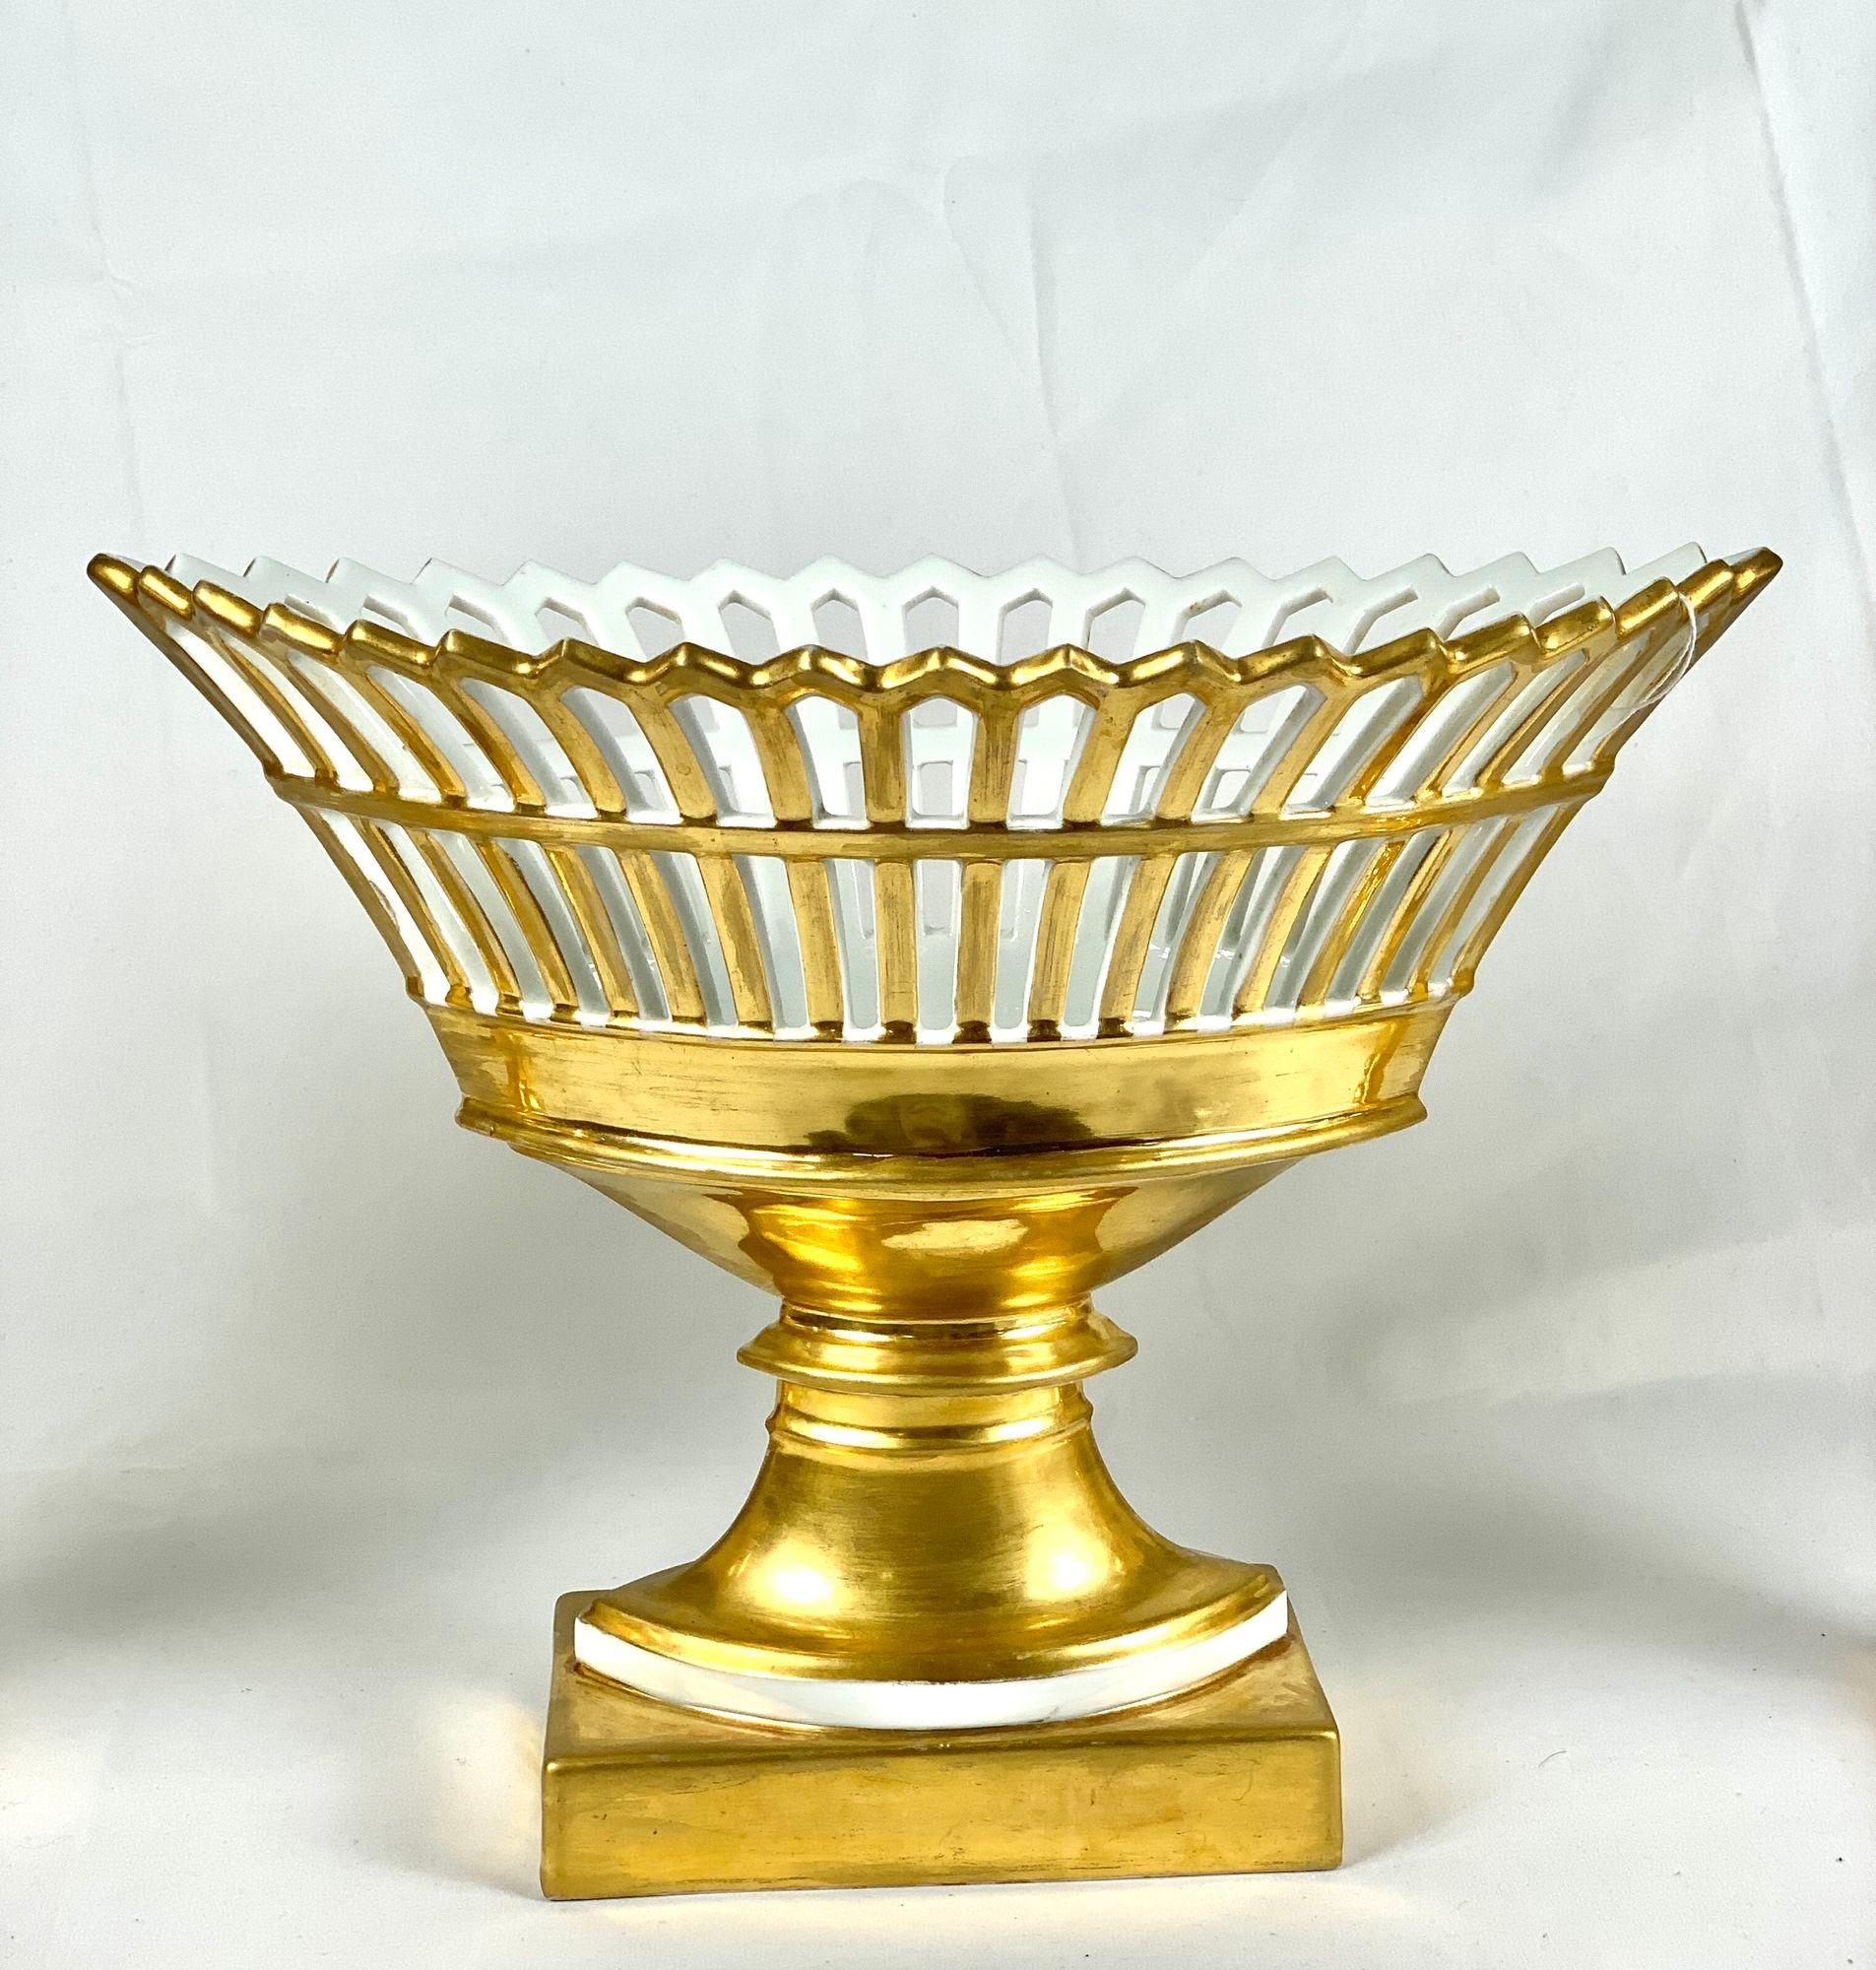 This elegant Paris Porcelain pierced basket is oval shaped, with lavishly gilded latticework.
The Empire style is timeless, and the latticework of the baskets lends delicacy and light to the design.
The white line across the top of the base